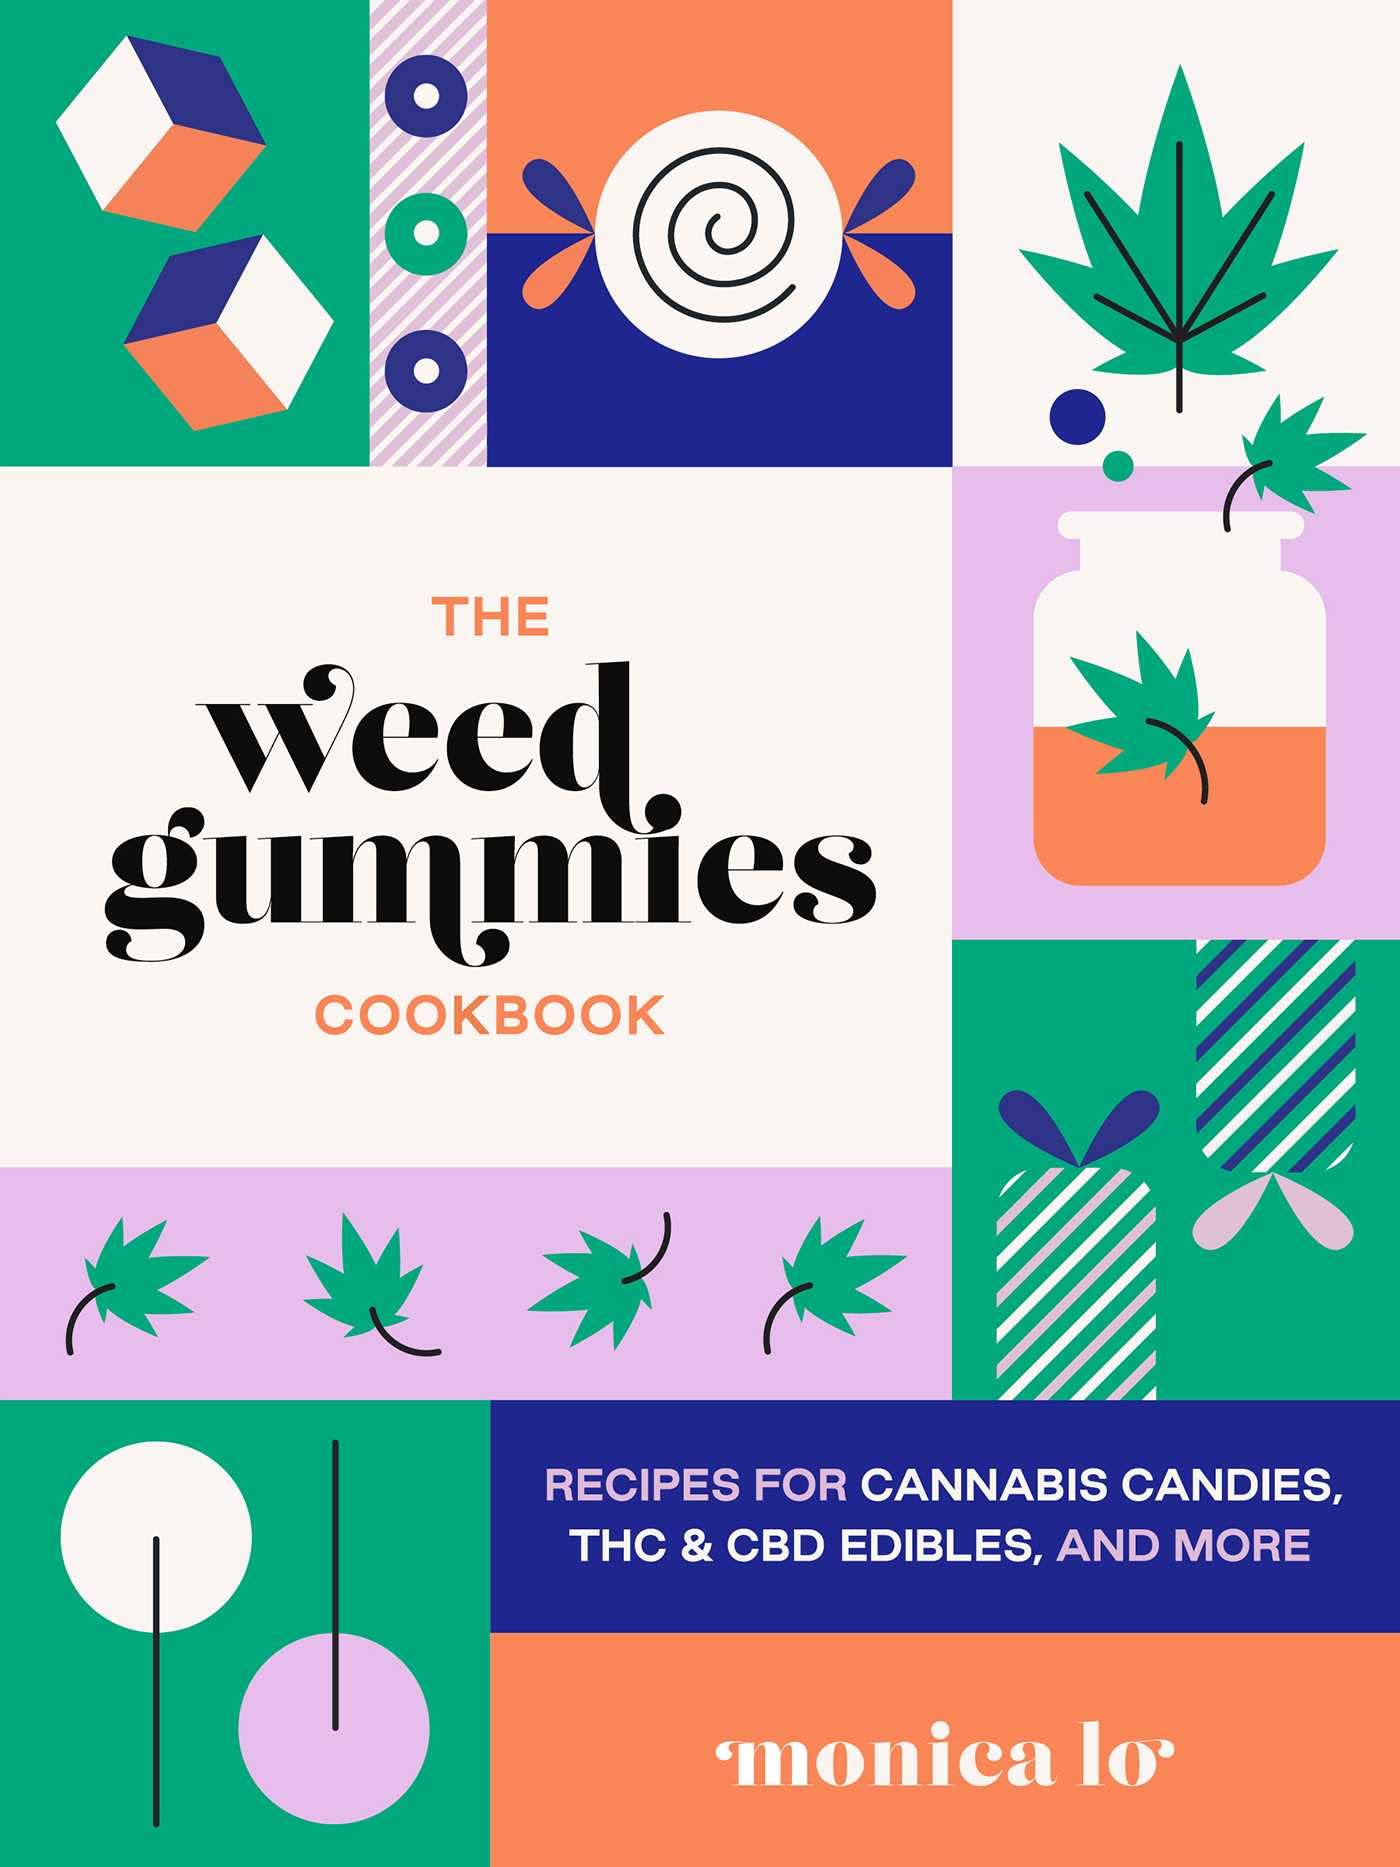 The Weed Gummies Cookbook: Recipes for Cannabis Candies, THC and CBD Edibles, and More (Monica Lo)